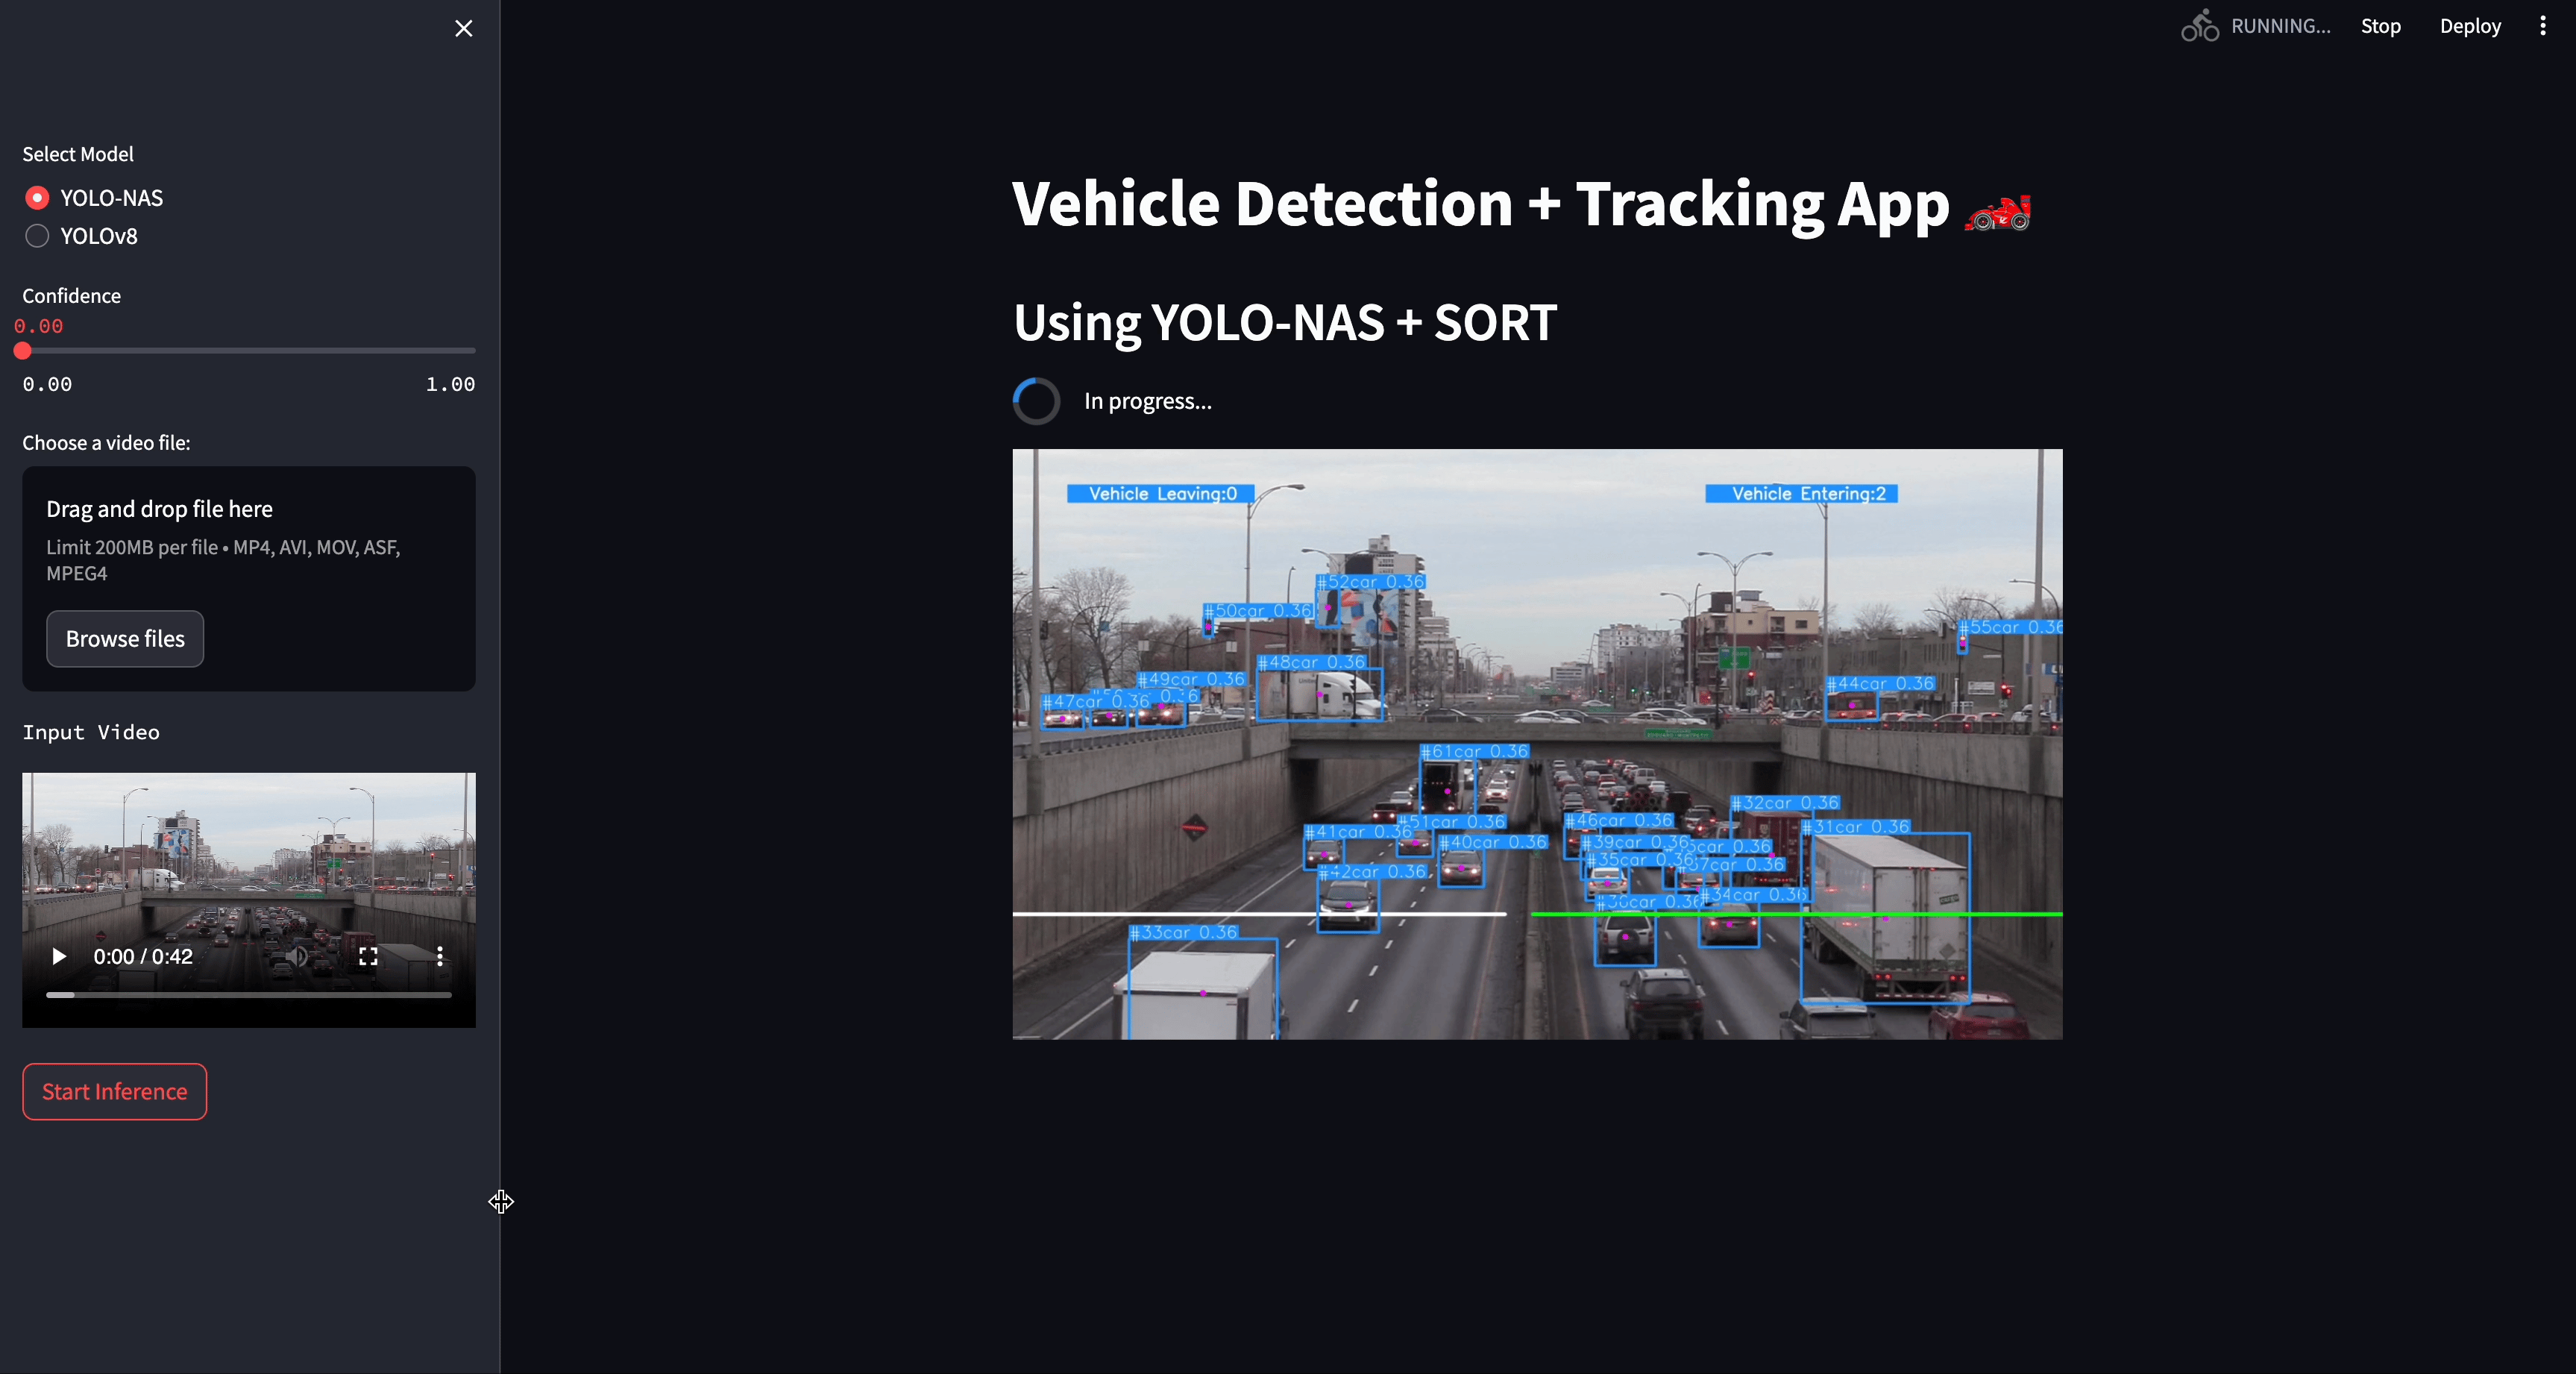 Vehicle Detection + Tracking App